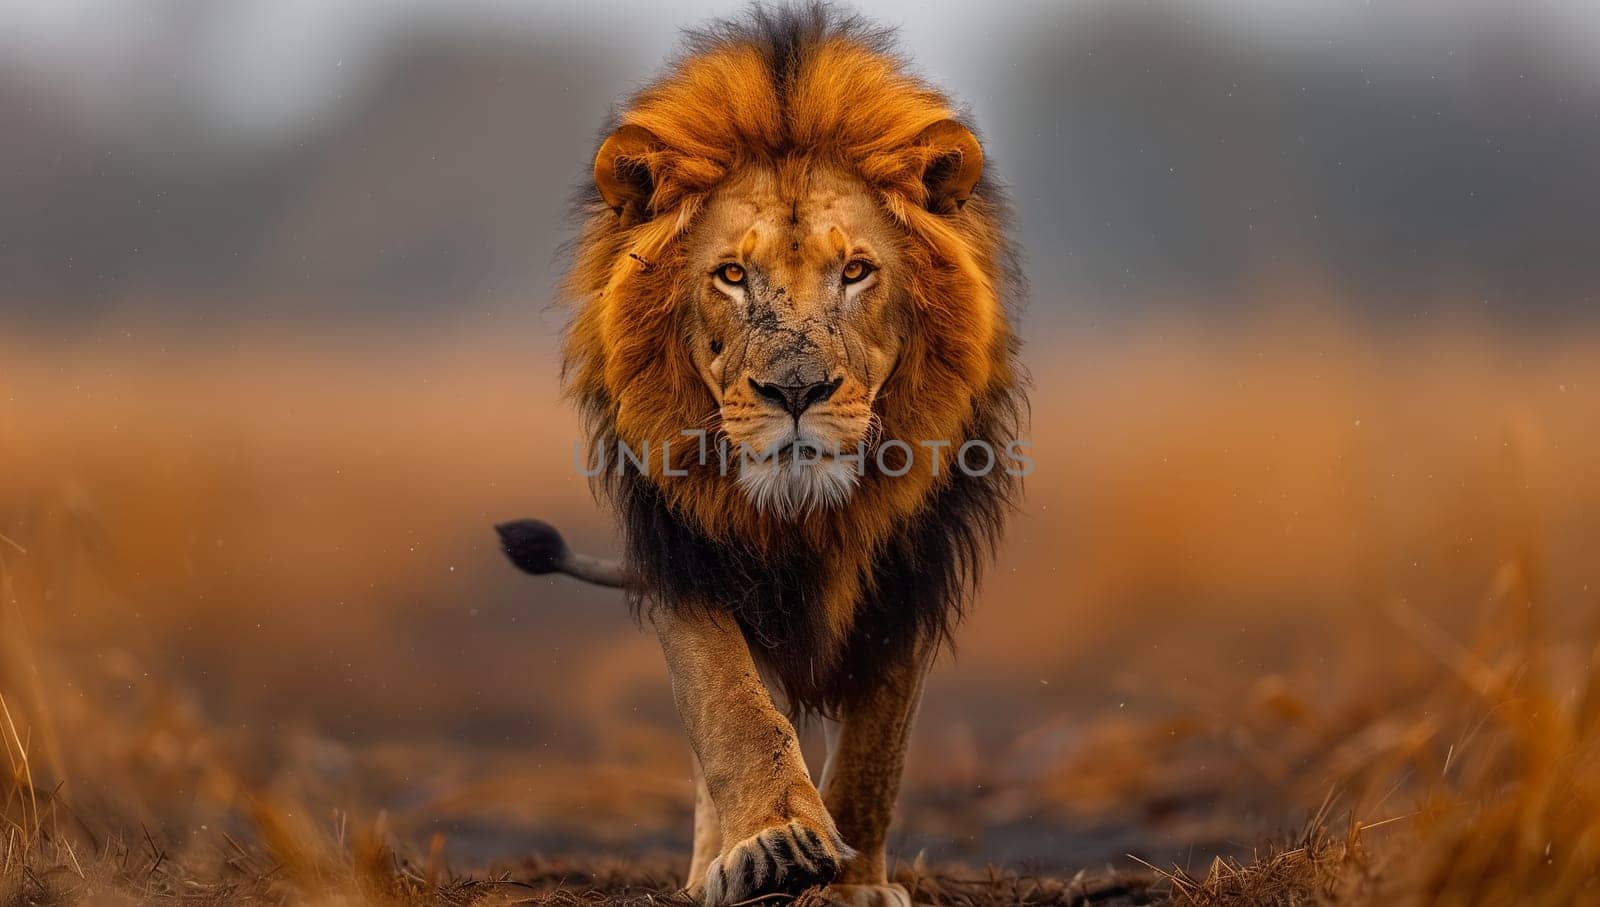 Felidae carnivore, Masai lion with whiskers walking in nature across grass field by richwolf